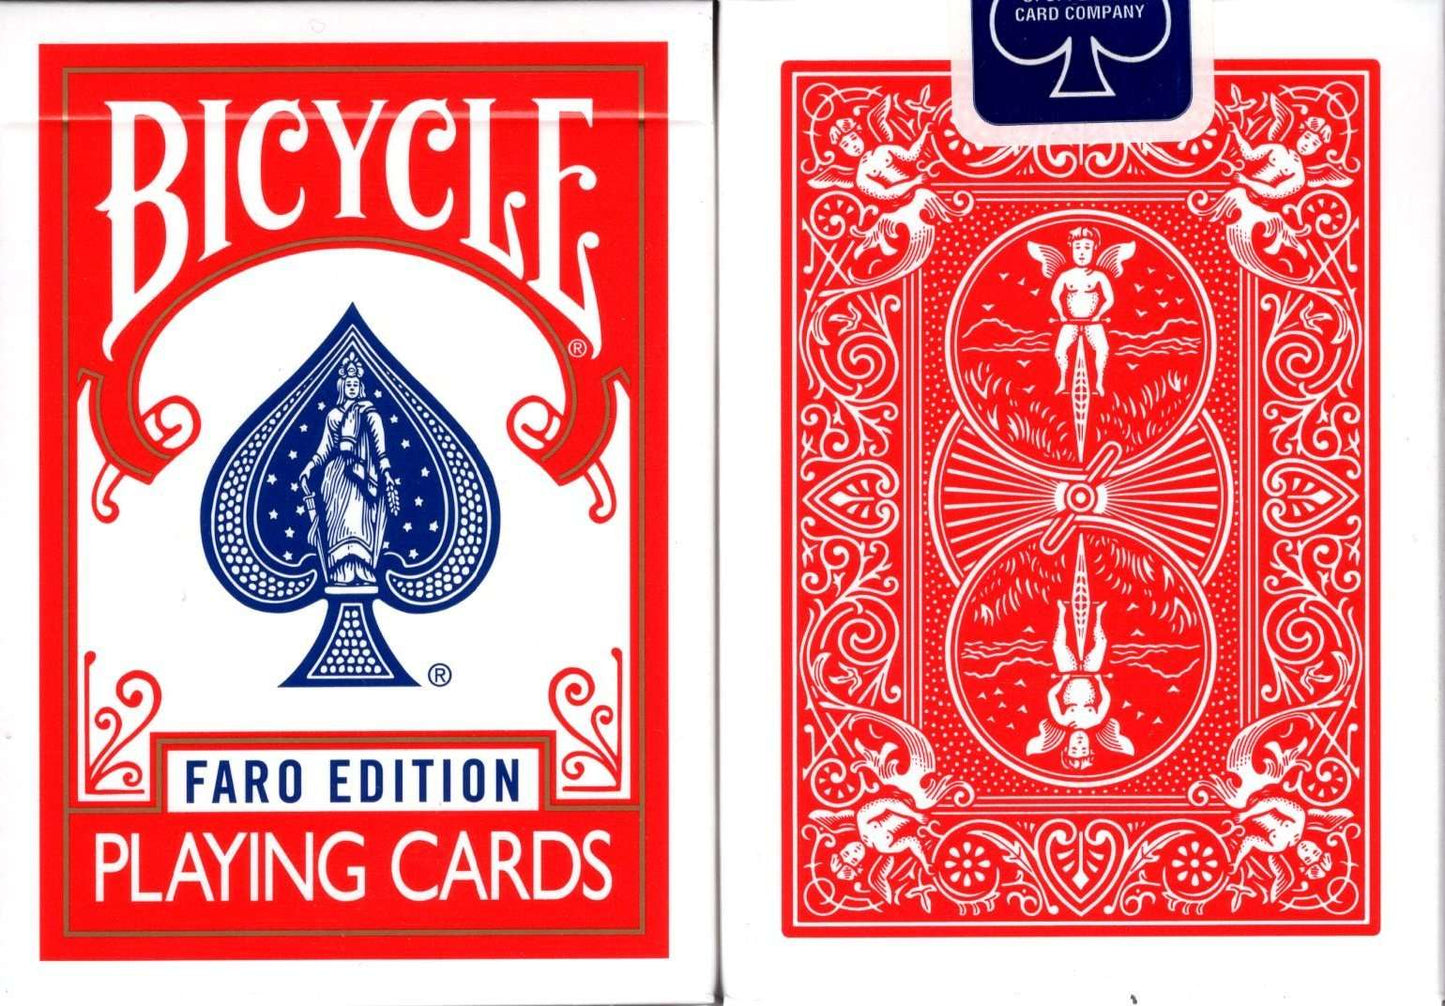 PlayingCardDecks.com-Faro Edition Bicycle Playing Cards: Red Deck